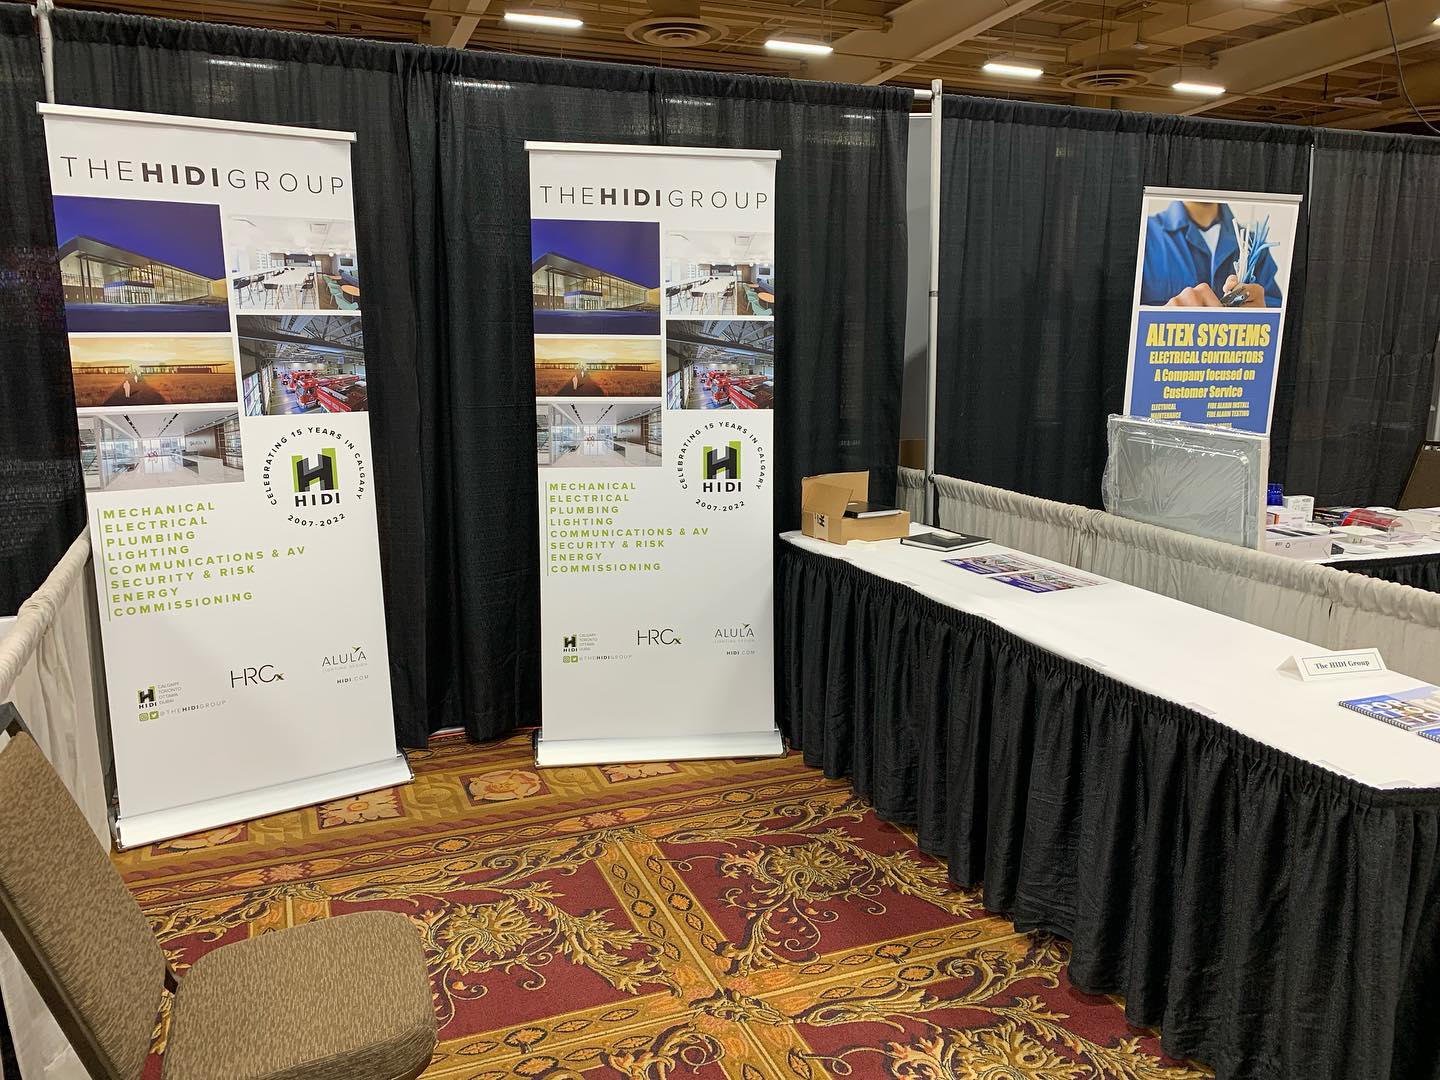 If you’re at the AEFAA Spring Conference & Tradeshow drop by the @thehidigroup booth. We’d love to see you. #thg #engineeringtomorrow #aefaa #tradeshow